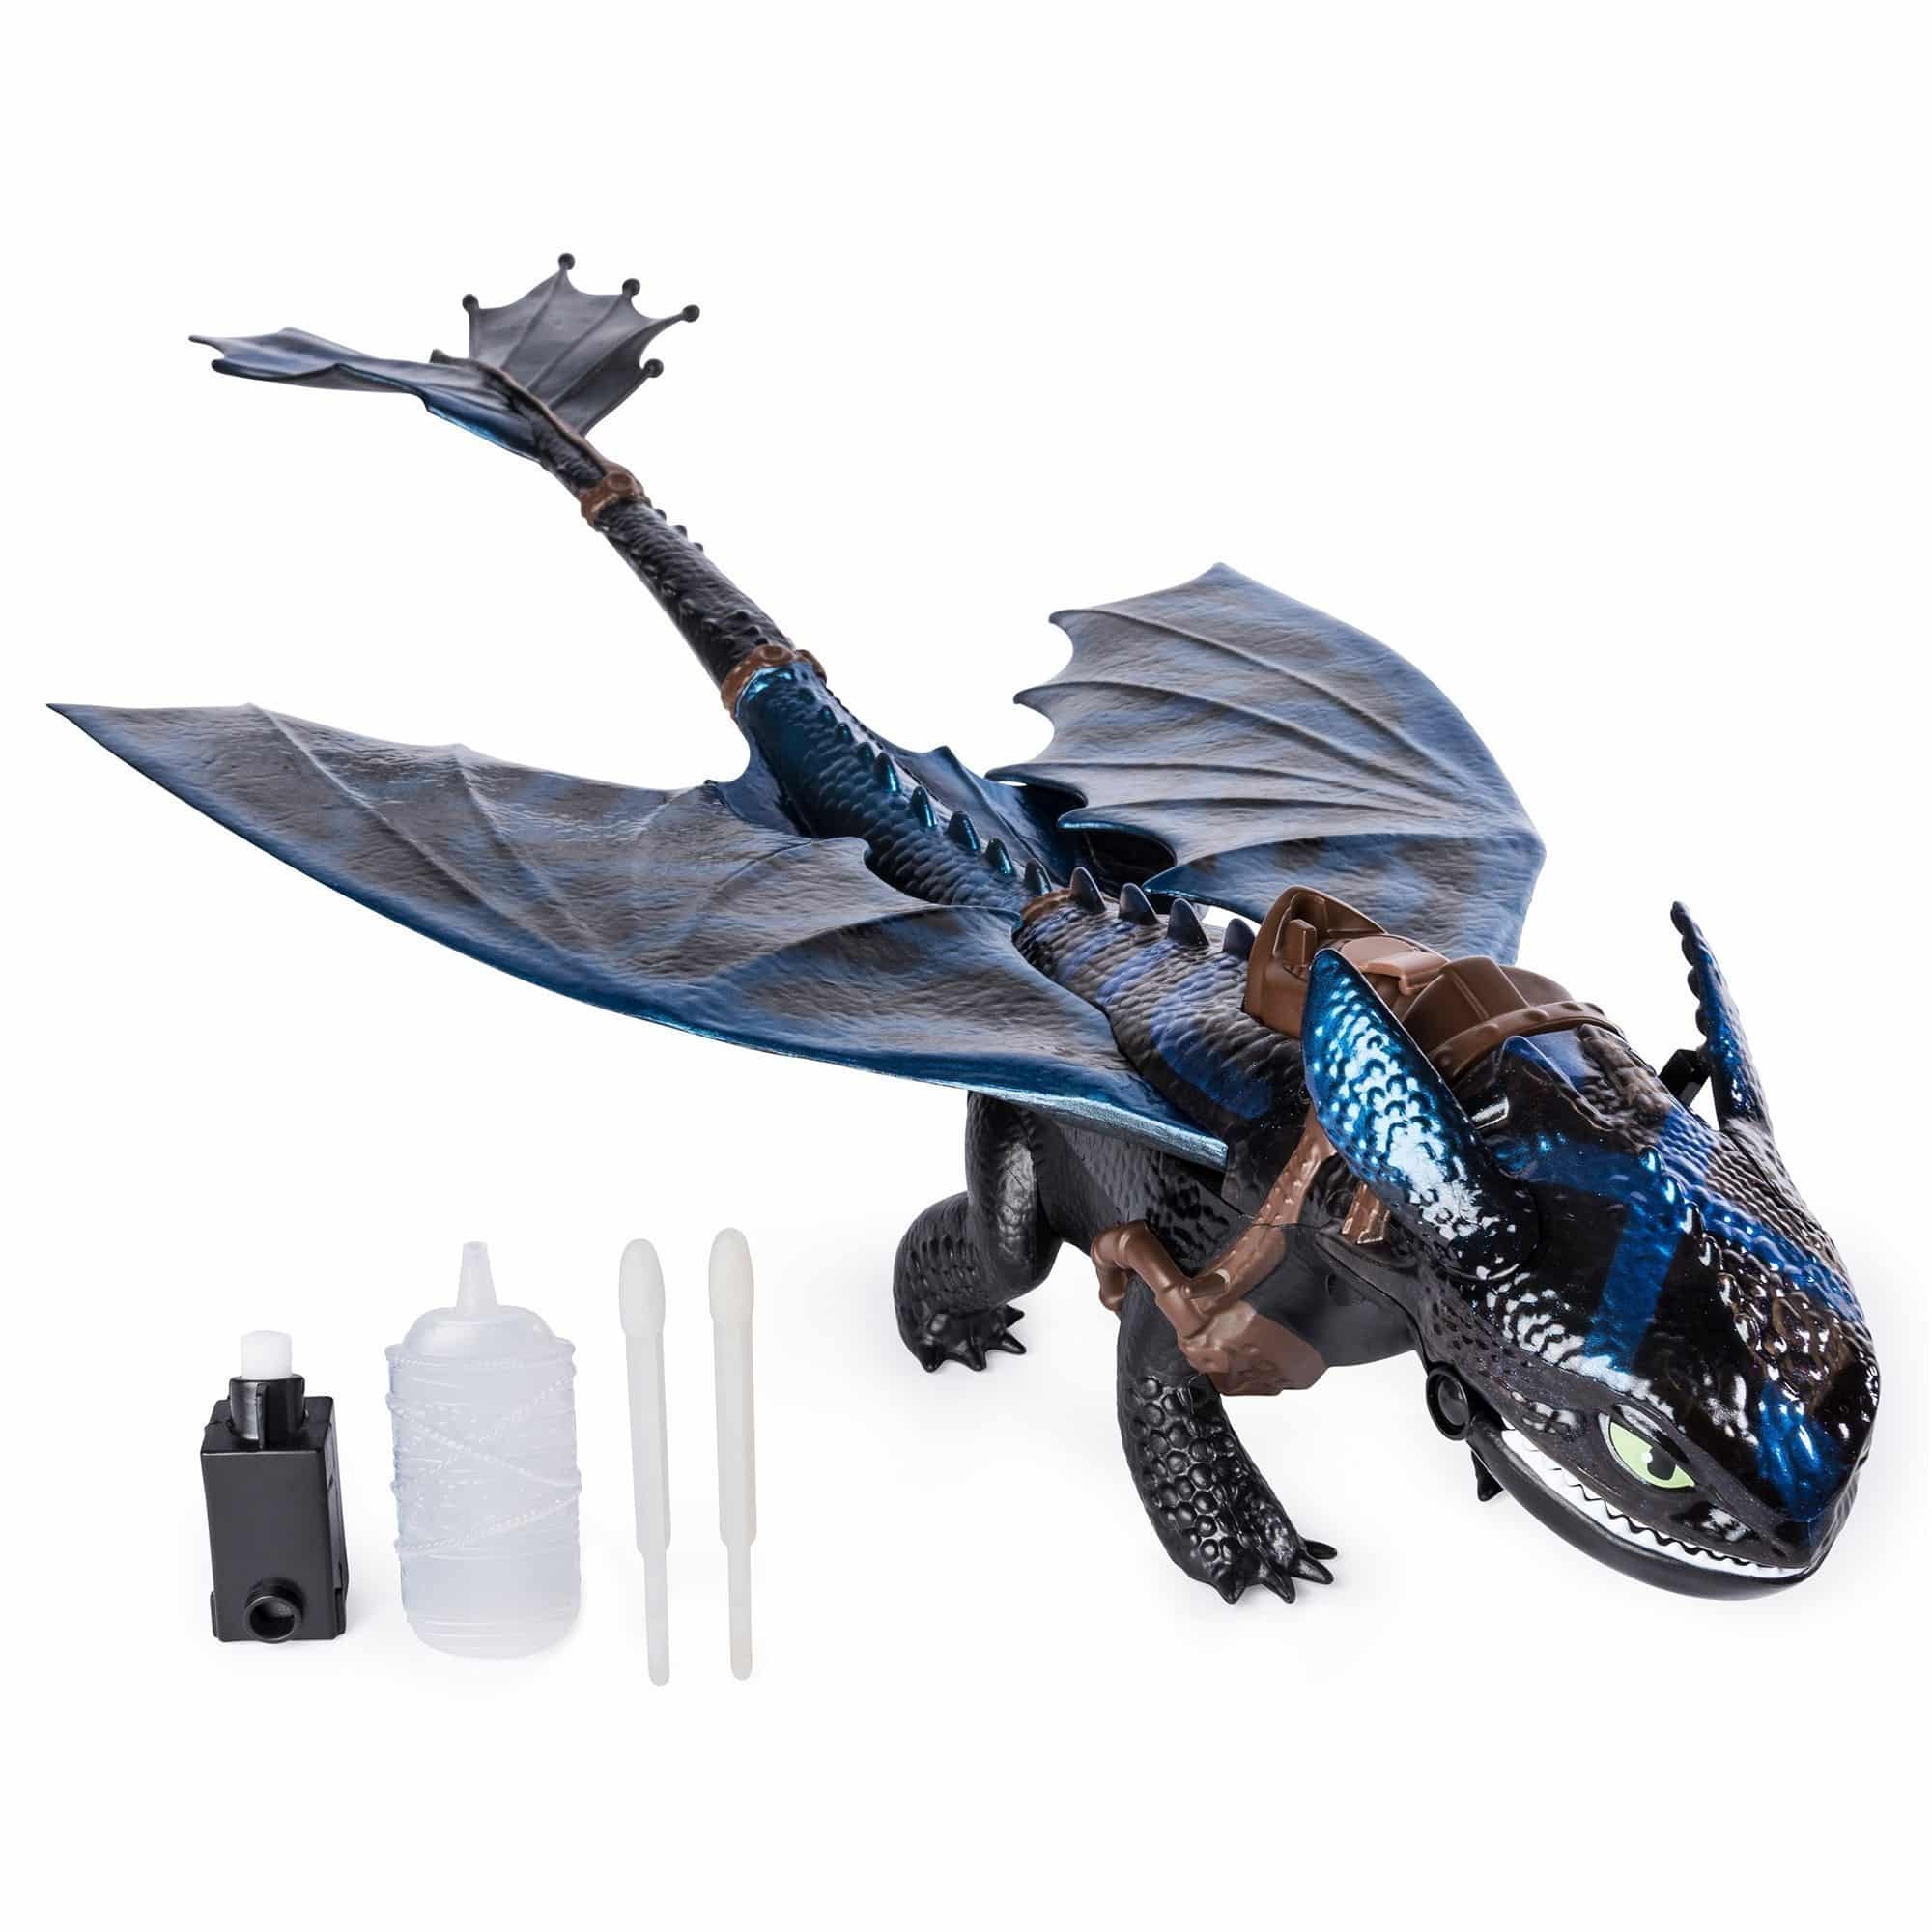 Dreamworks - How To Train Your Dragon 3 - Giant Fire Breathing Toothless